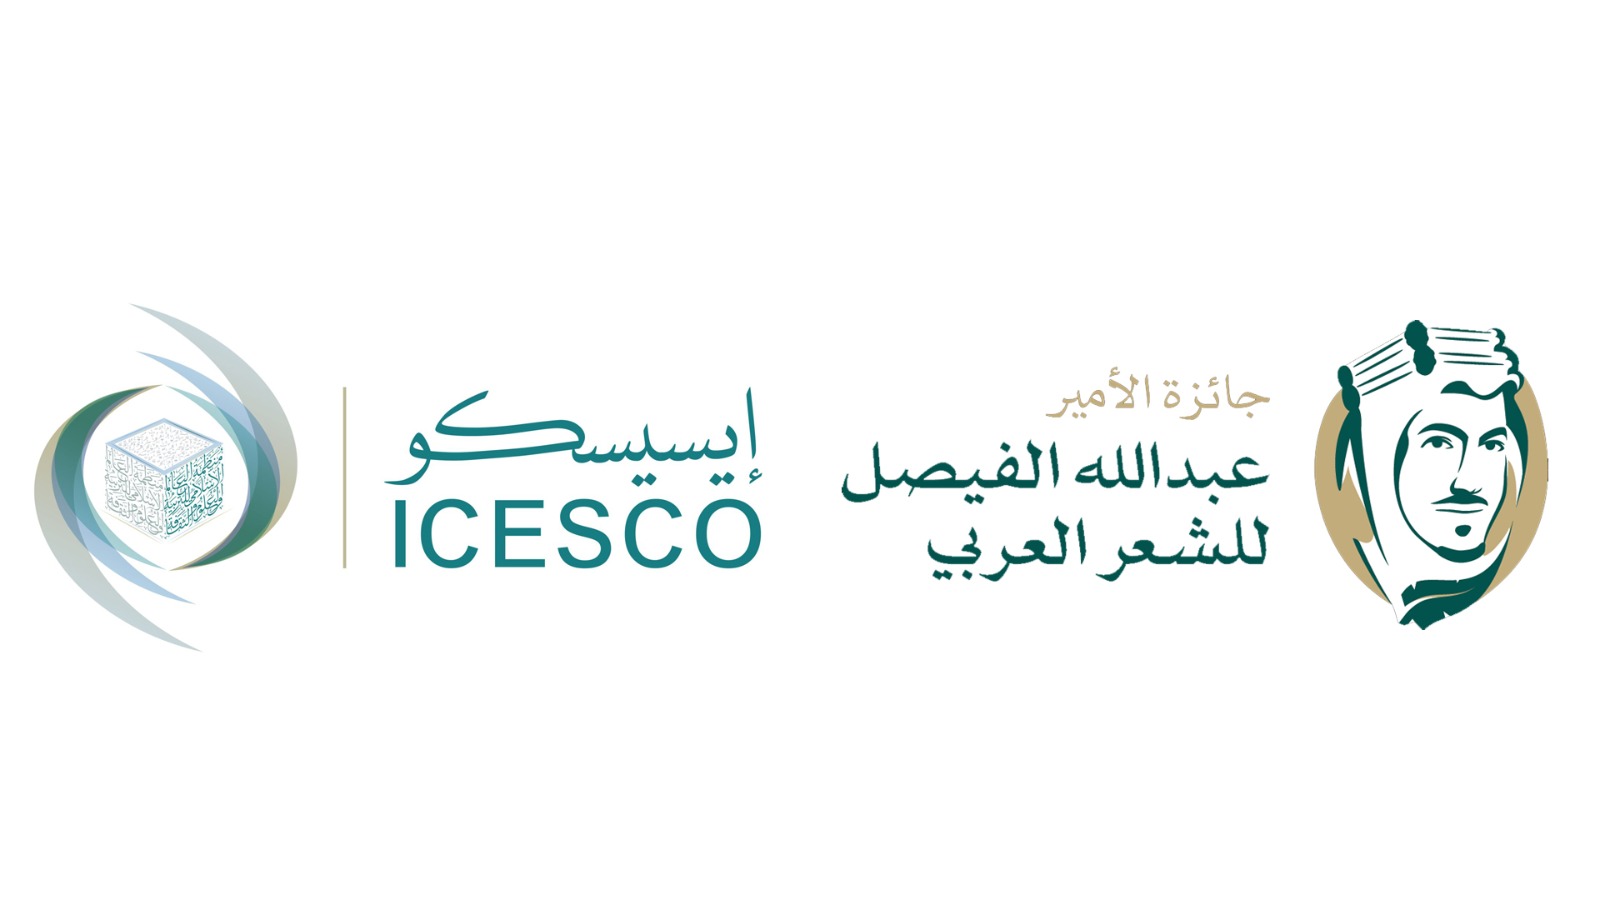 ICESCO Congratulates Organizers and Winners of Prince Abdullah Al-Faisal Prize for Arabic Poetry